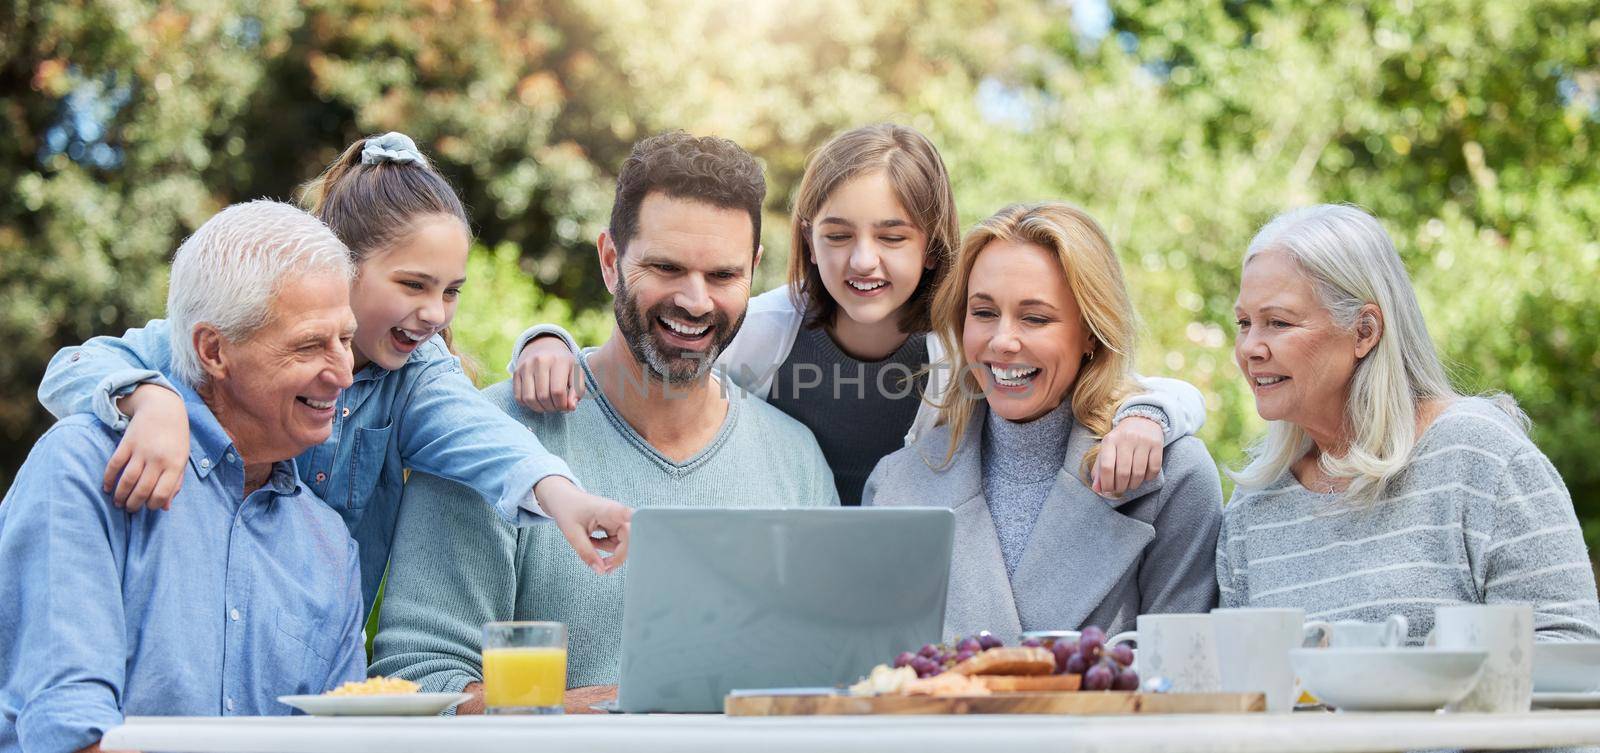 Family is a collection of people. Shot of a family using a laptop outside. by YuriArcurs